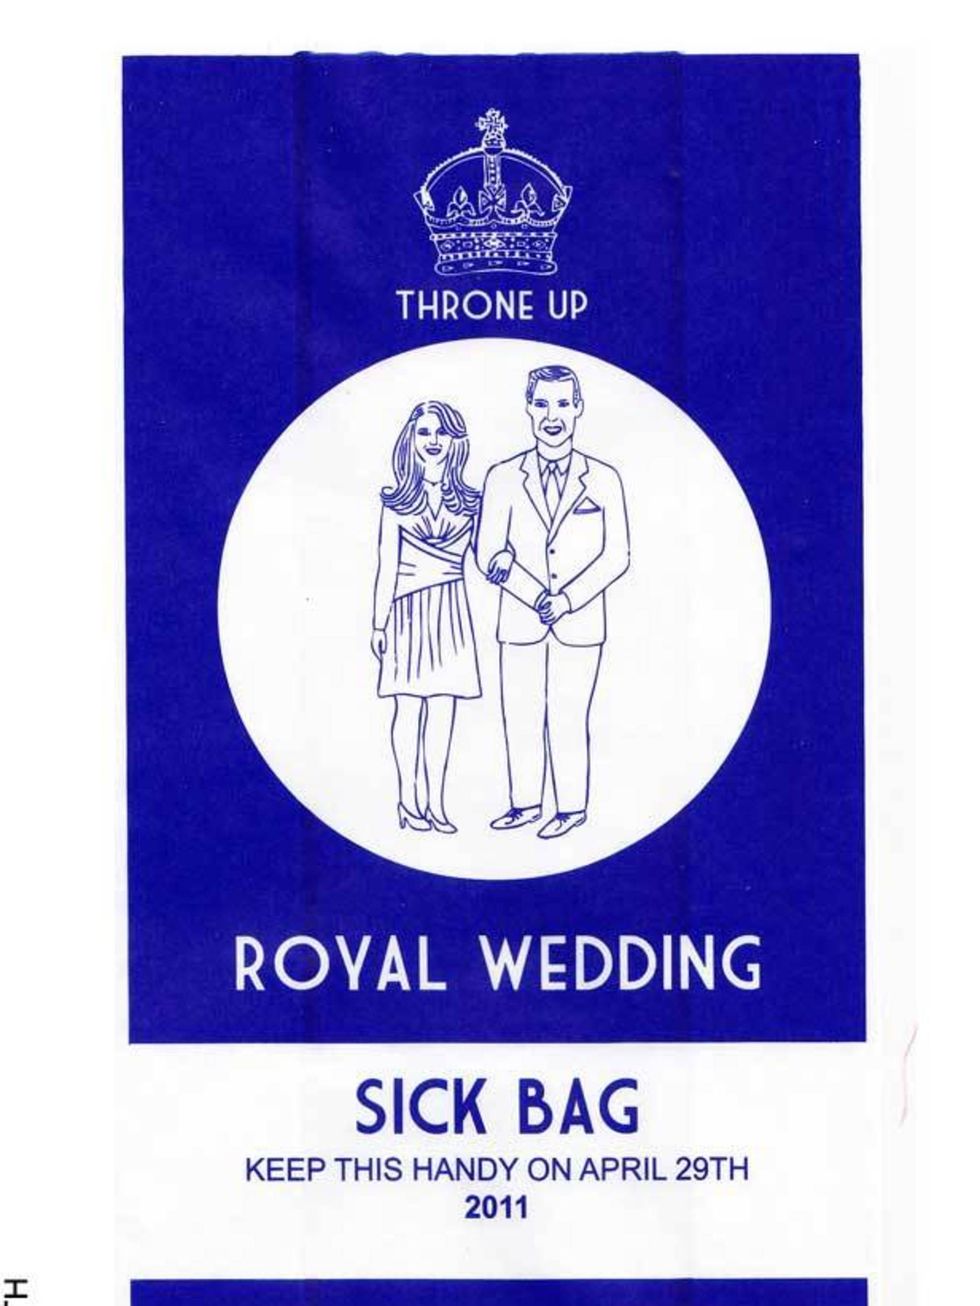 <p><a href="http://www.elleuk.com/news/Star-style-News/the-royal-wedding-is-on">Royal Wedding</a> Sick Bags, £3 each, at <a href="http://lydialeith.bigcartel.com/products">Lydia Leith</a></p>